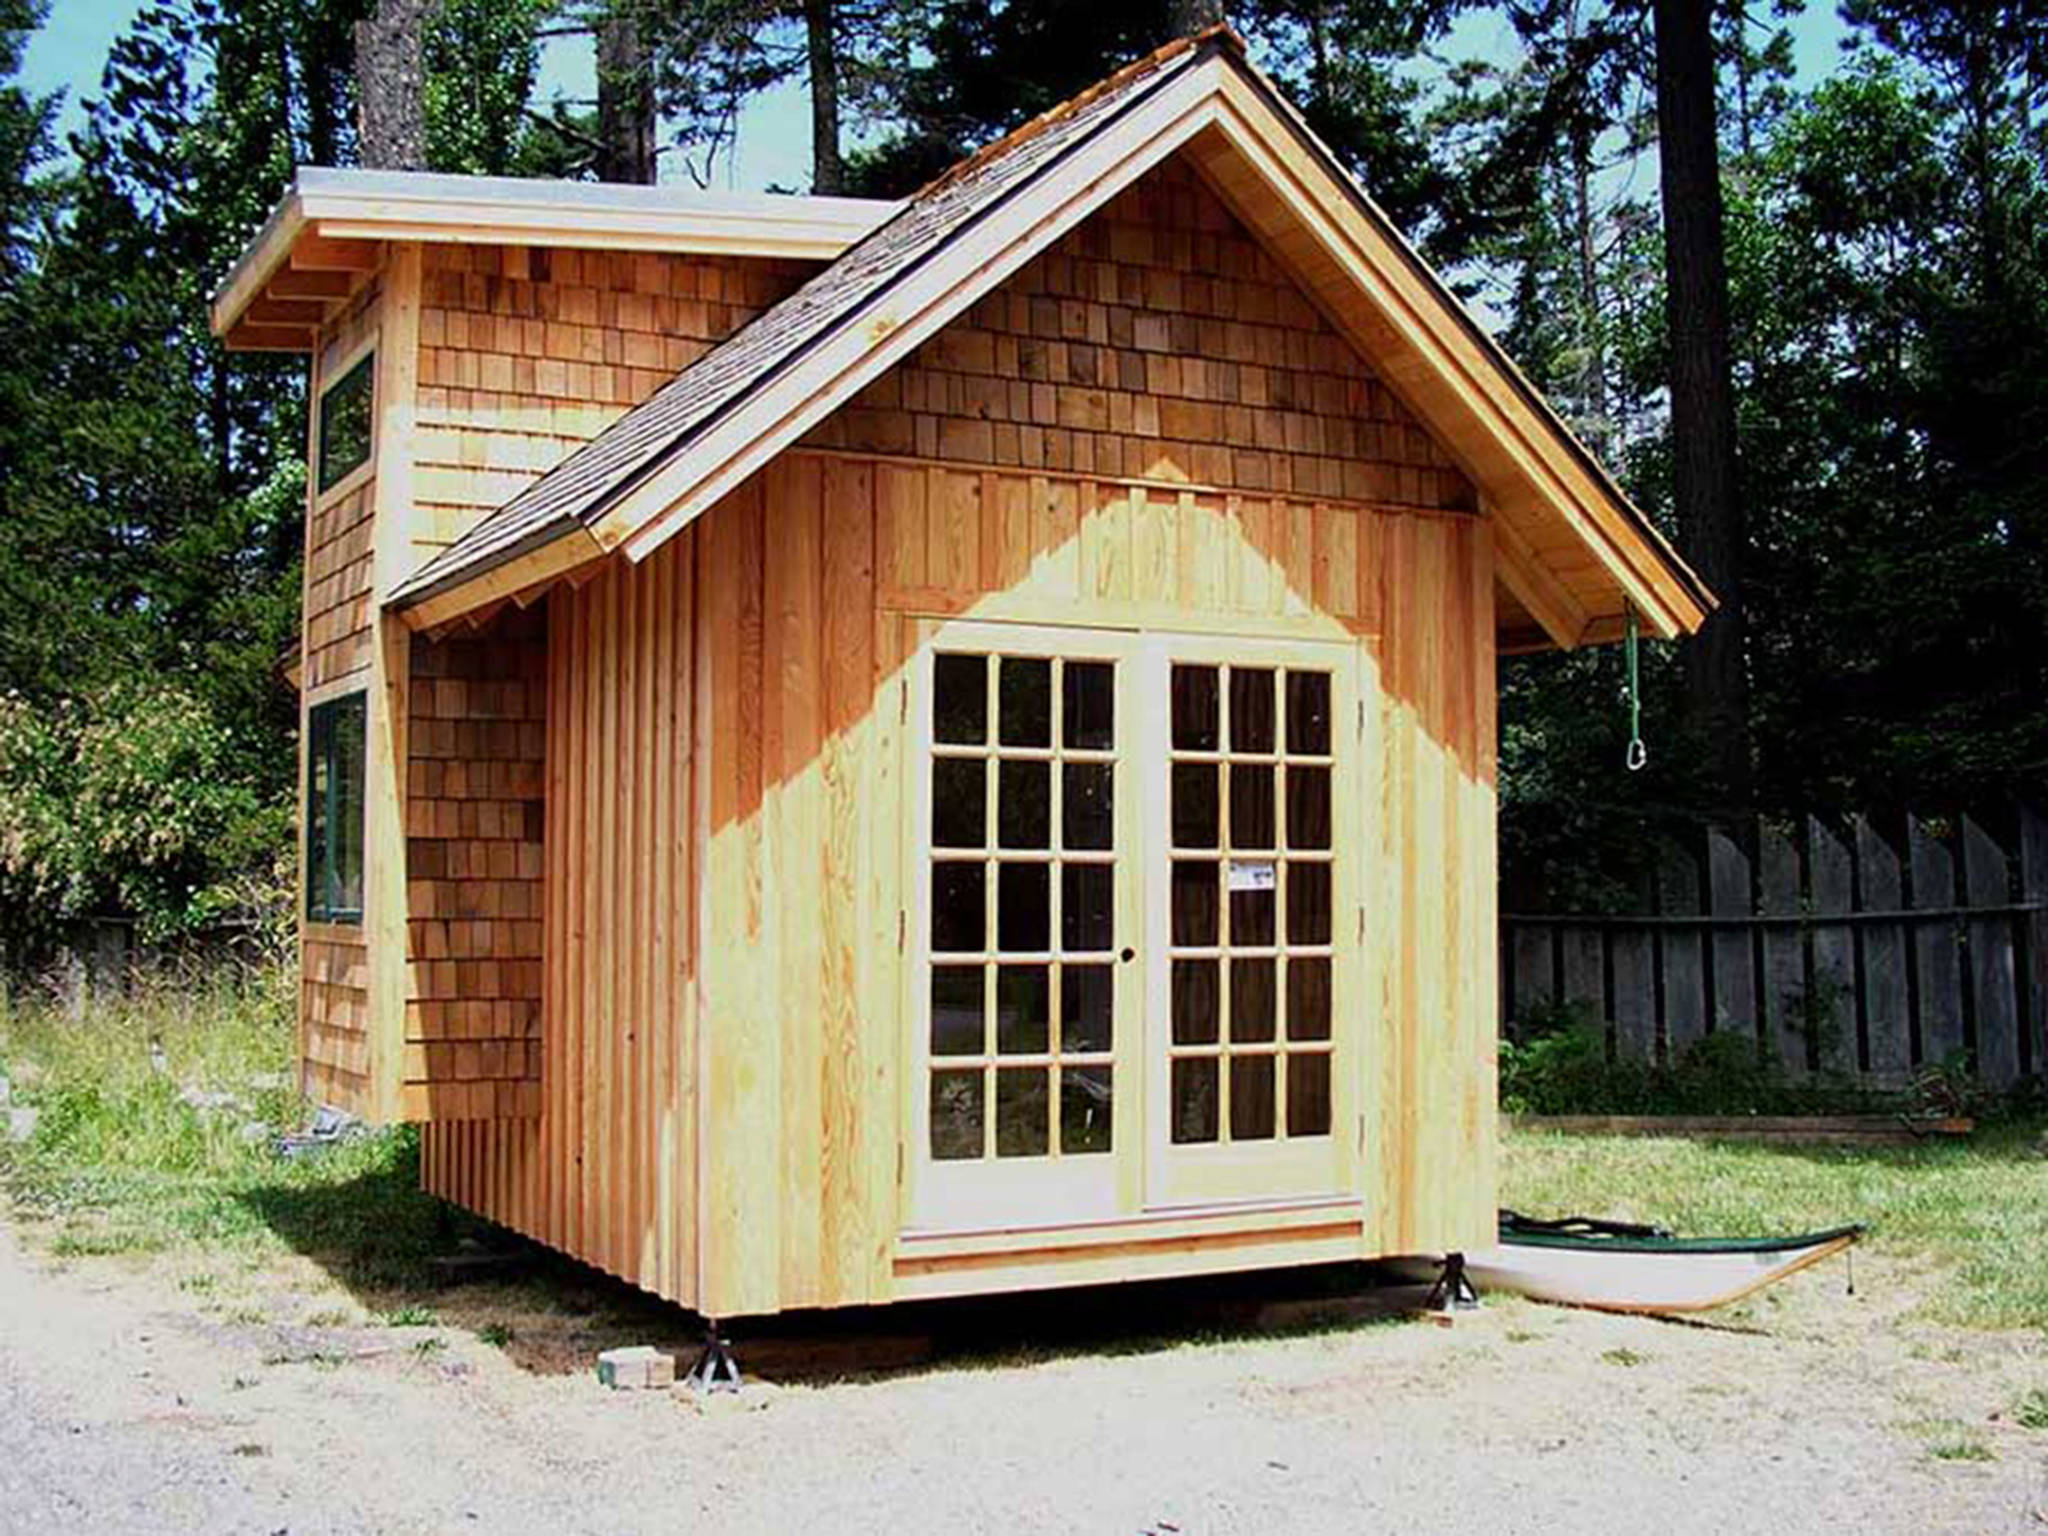 Islanders request easier path to live in tiny houses